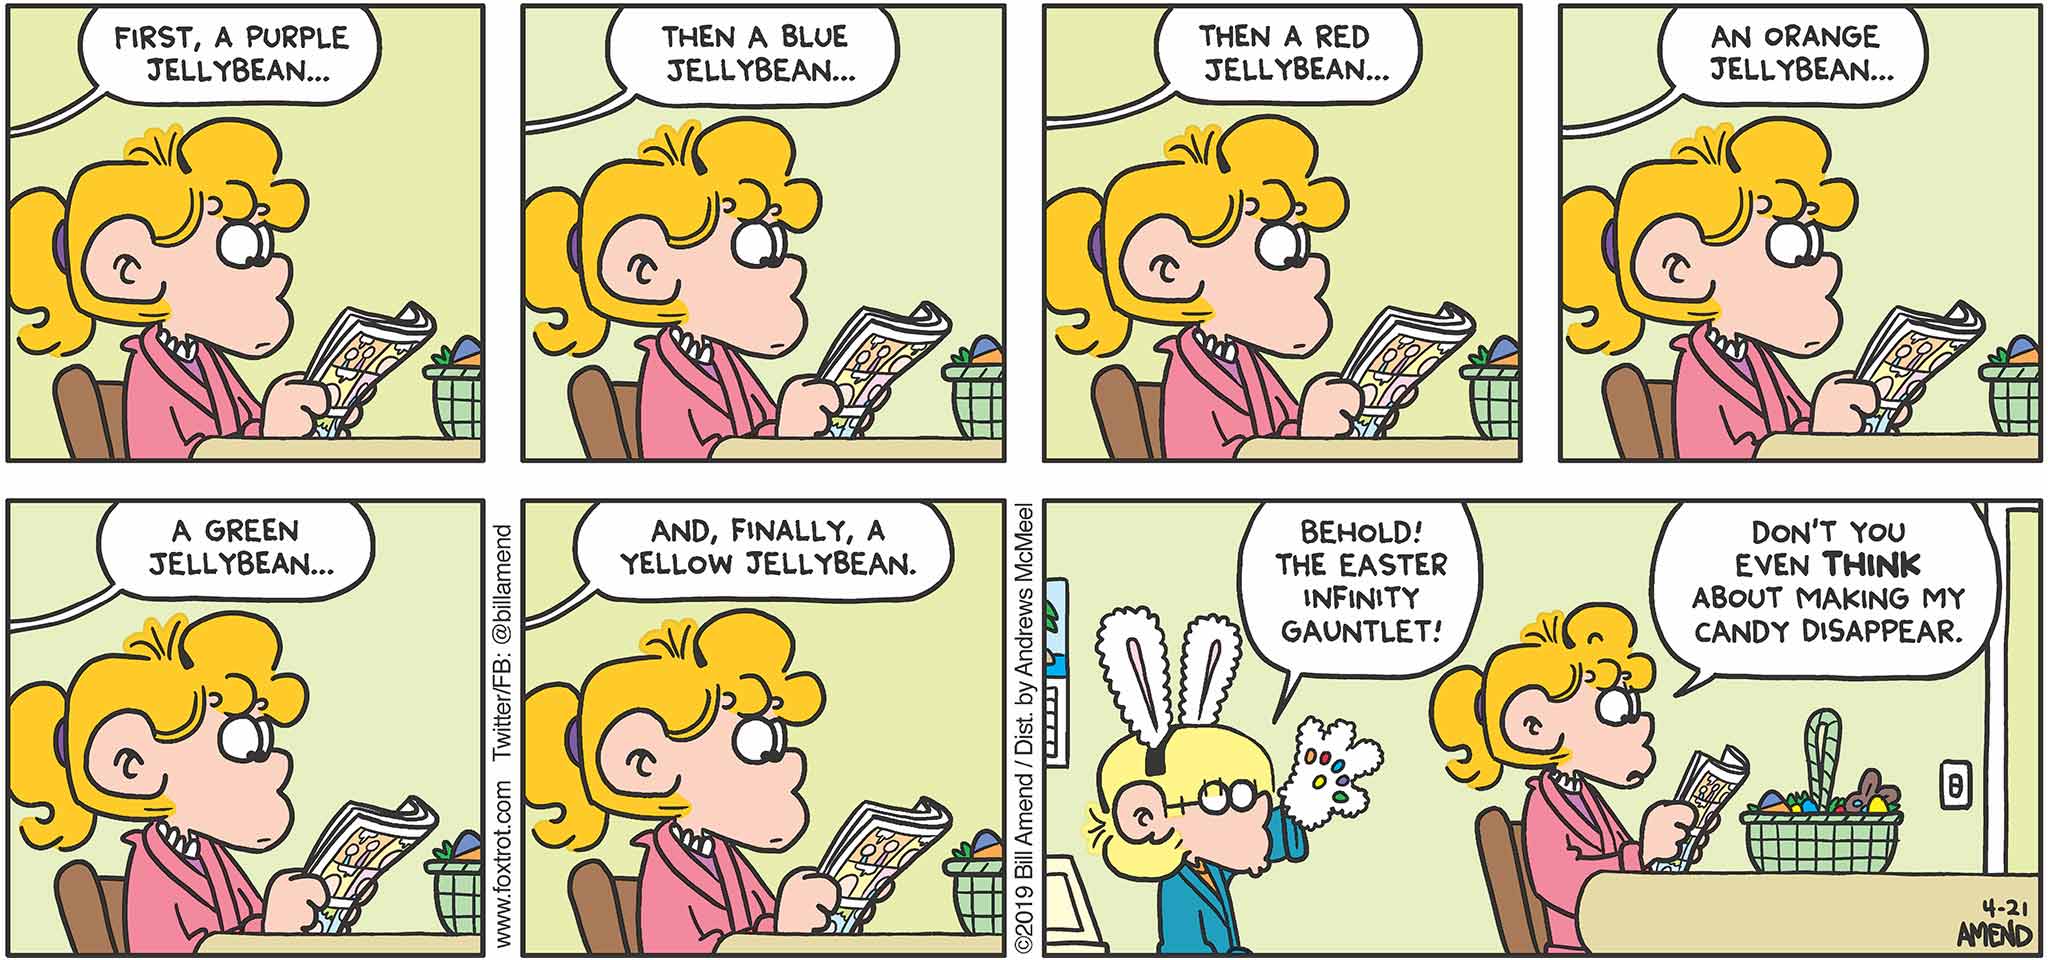 FoxTrot by Bill Amend - "Infinity Beans" published April 21, 2019 - Jason: First, a purple jeallybean... then a blue jellybean... then a red jellybean... an orange jellybean... a green jellybean... and, finally, a yellow jelly bean. Behold! The Easter Infinity Gauntlet! Paige: Don't you even think about making my candy disappear.